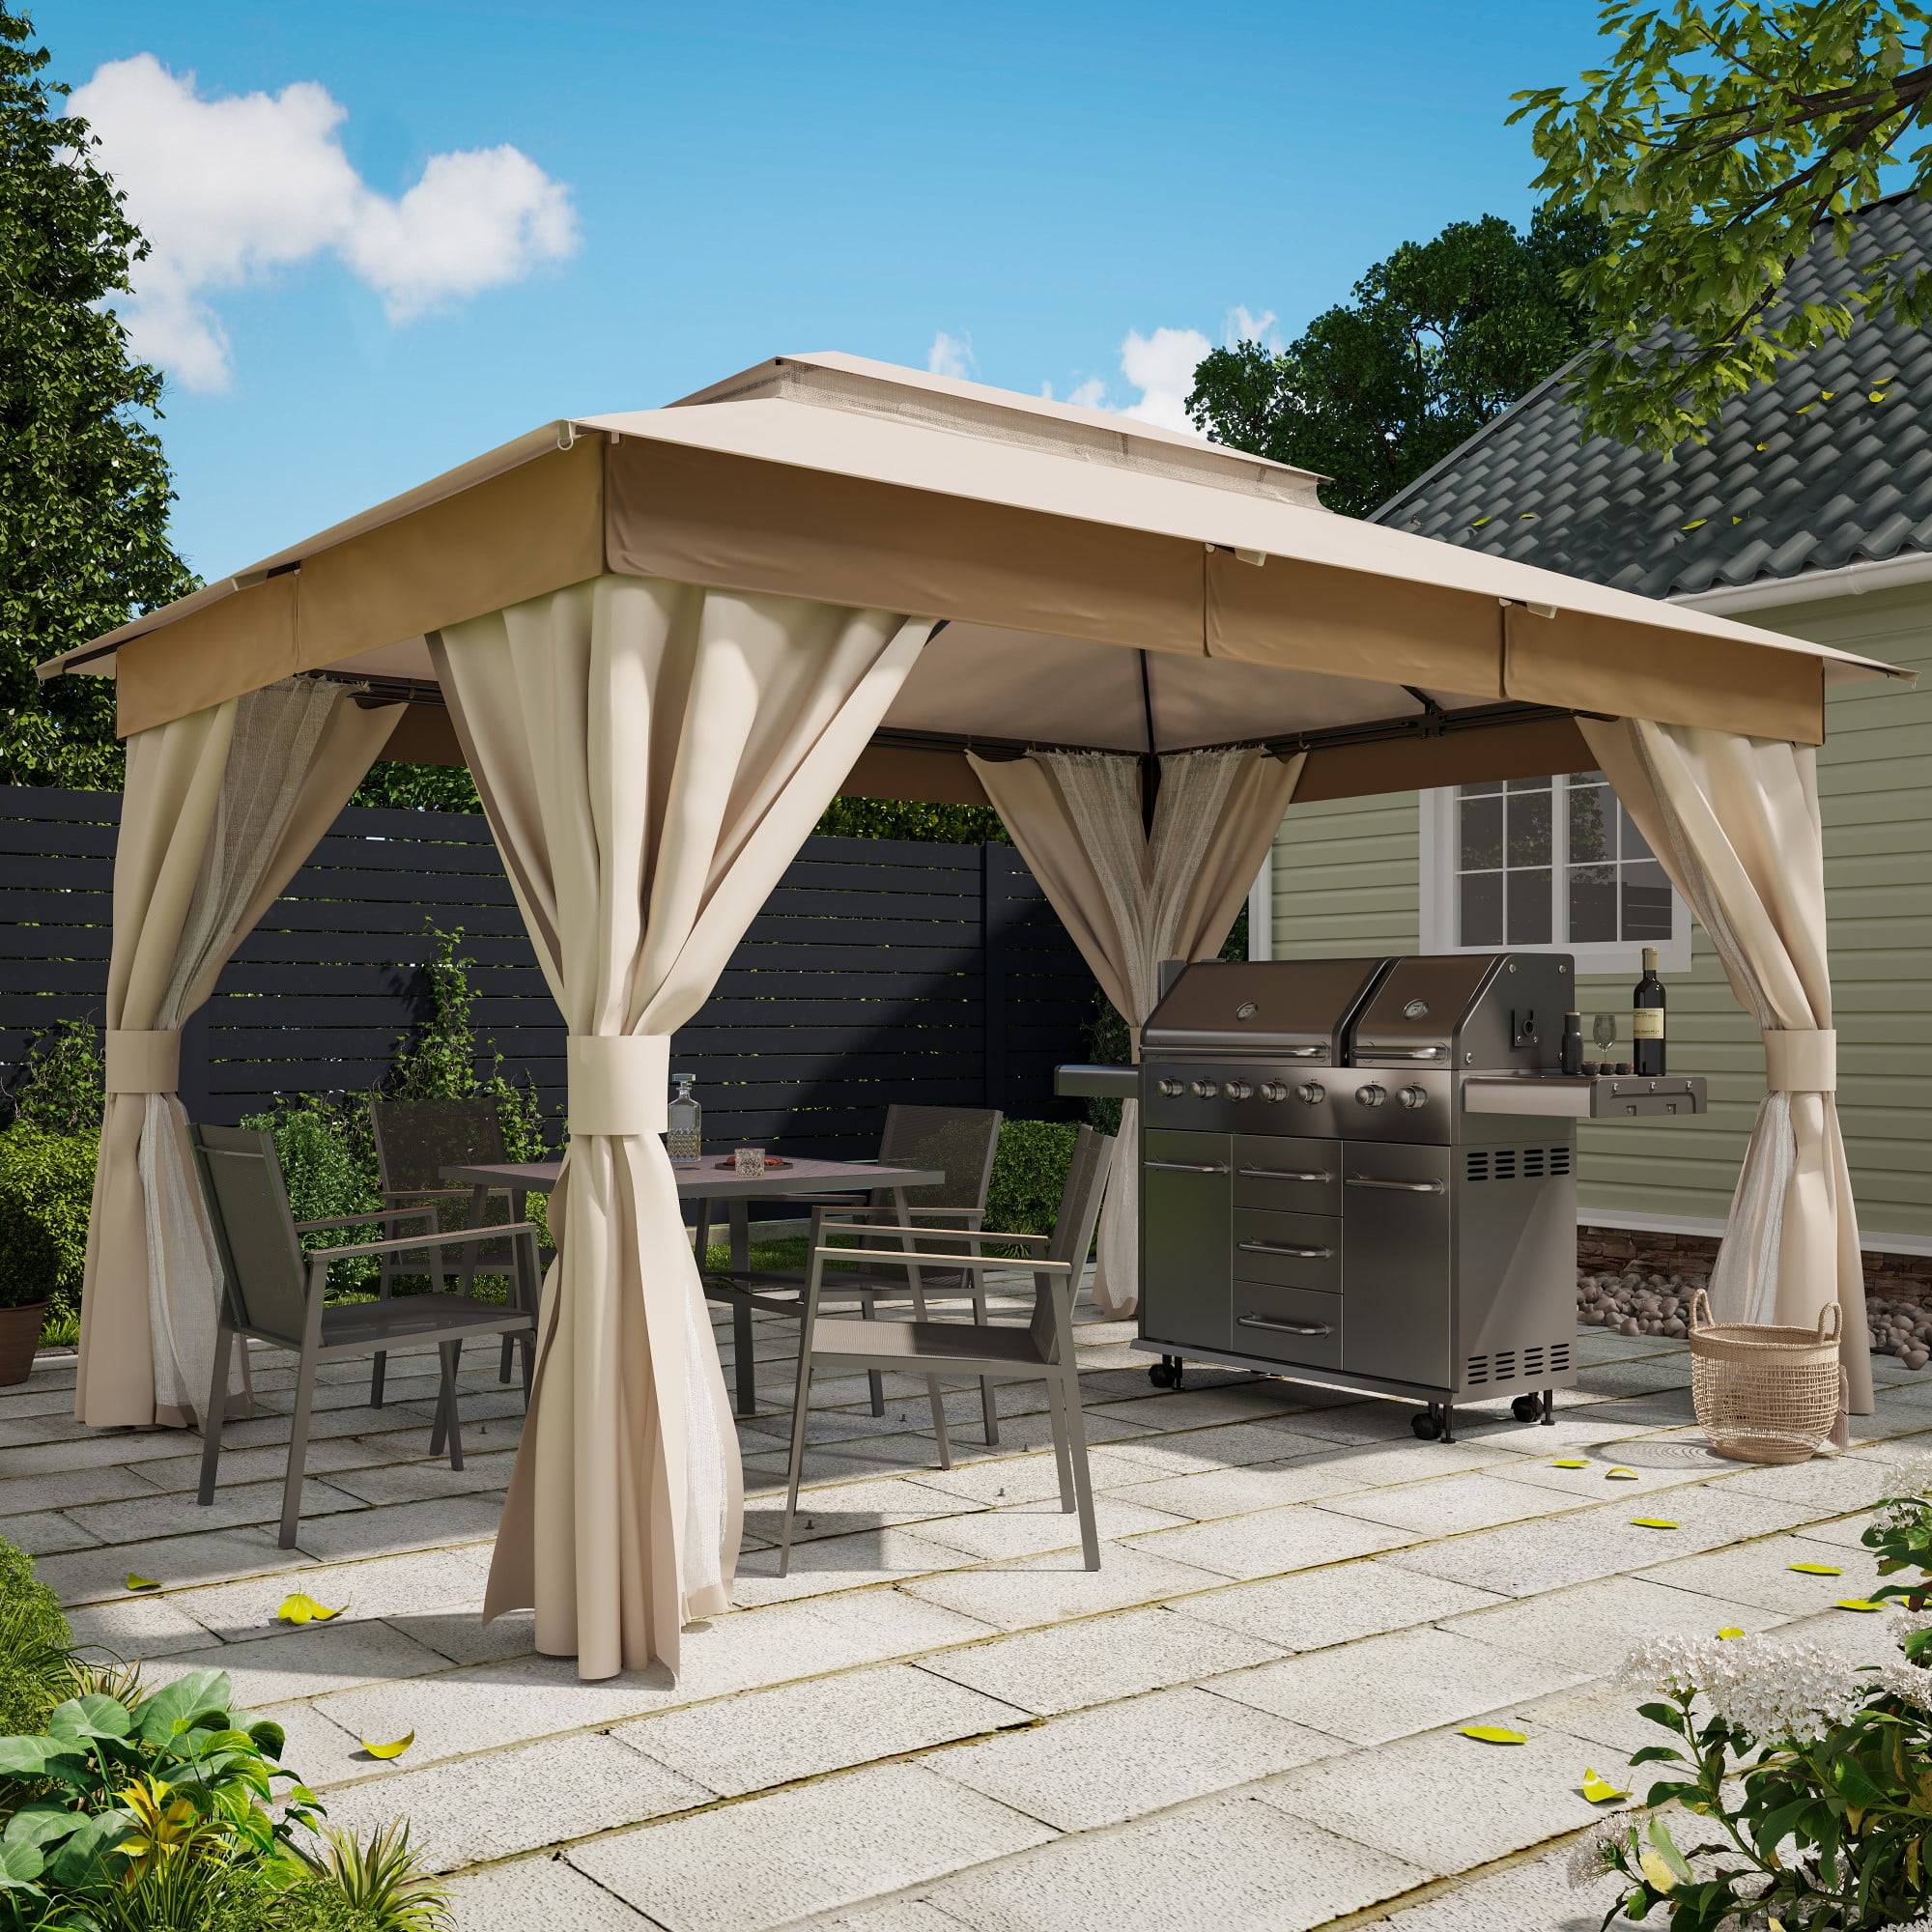 Slepen schuur stoel LAUSAINT HOME Patio Gazebo 10'x13' with Expansion Bolts, Double Roofs  Outdoor Shelter Tent with Nettings and Privacy Screens (Khaki) - Walmart.com